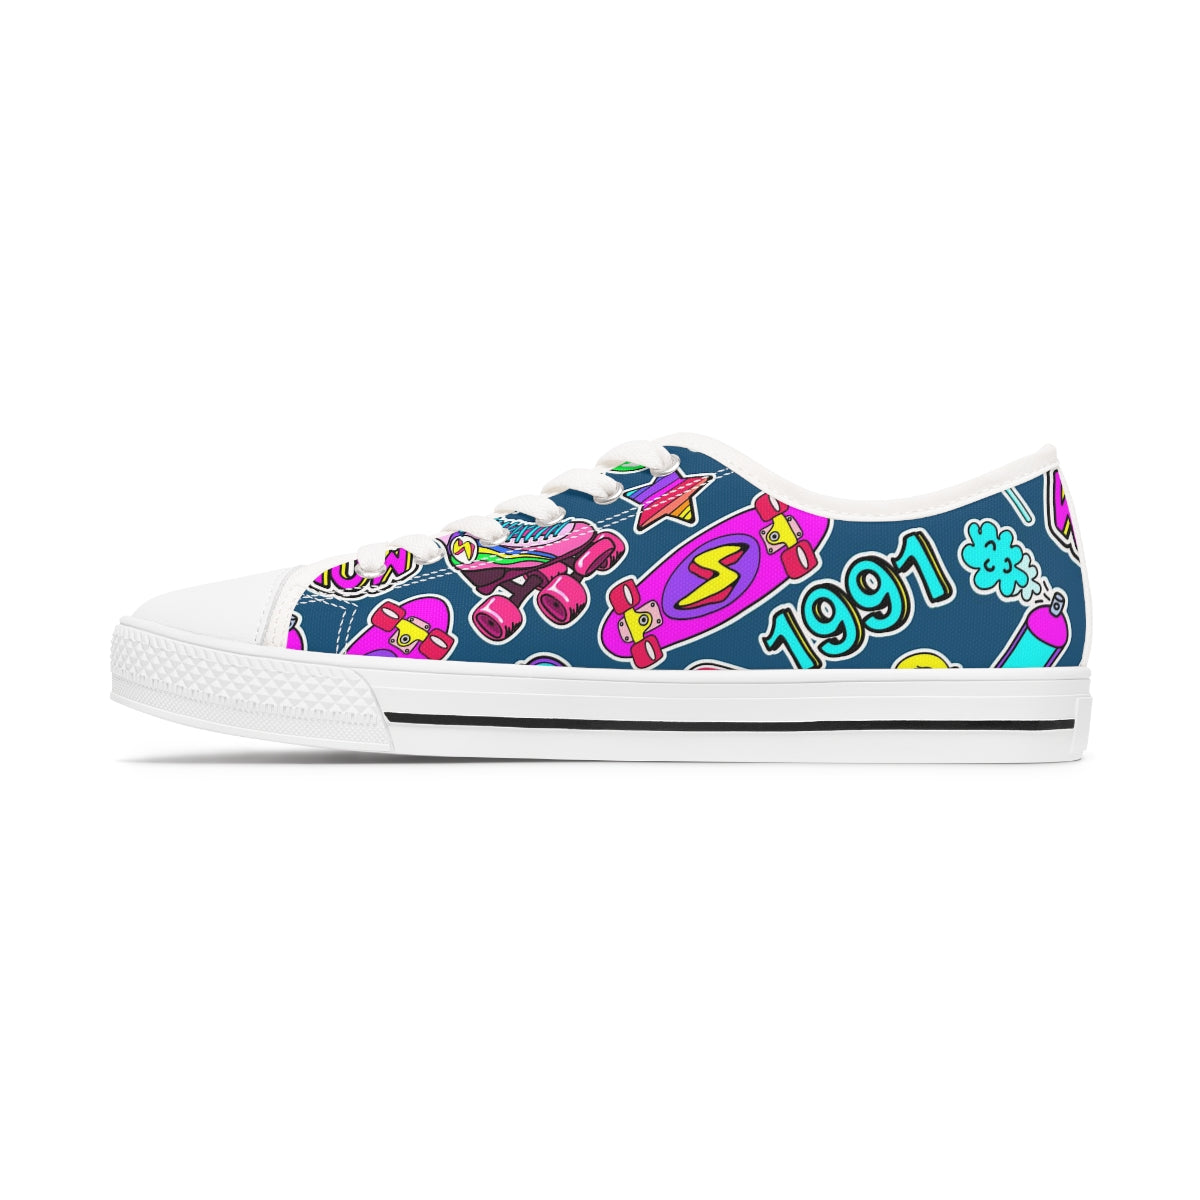 90s Design - Women's Low Top Sneakers ( Black or White Sole )